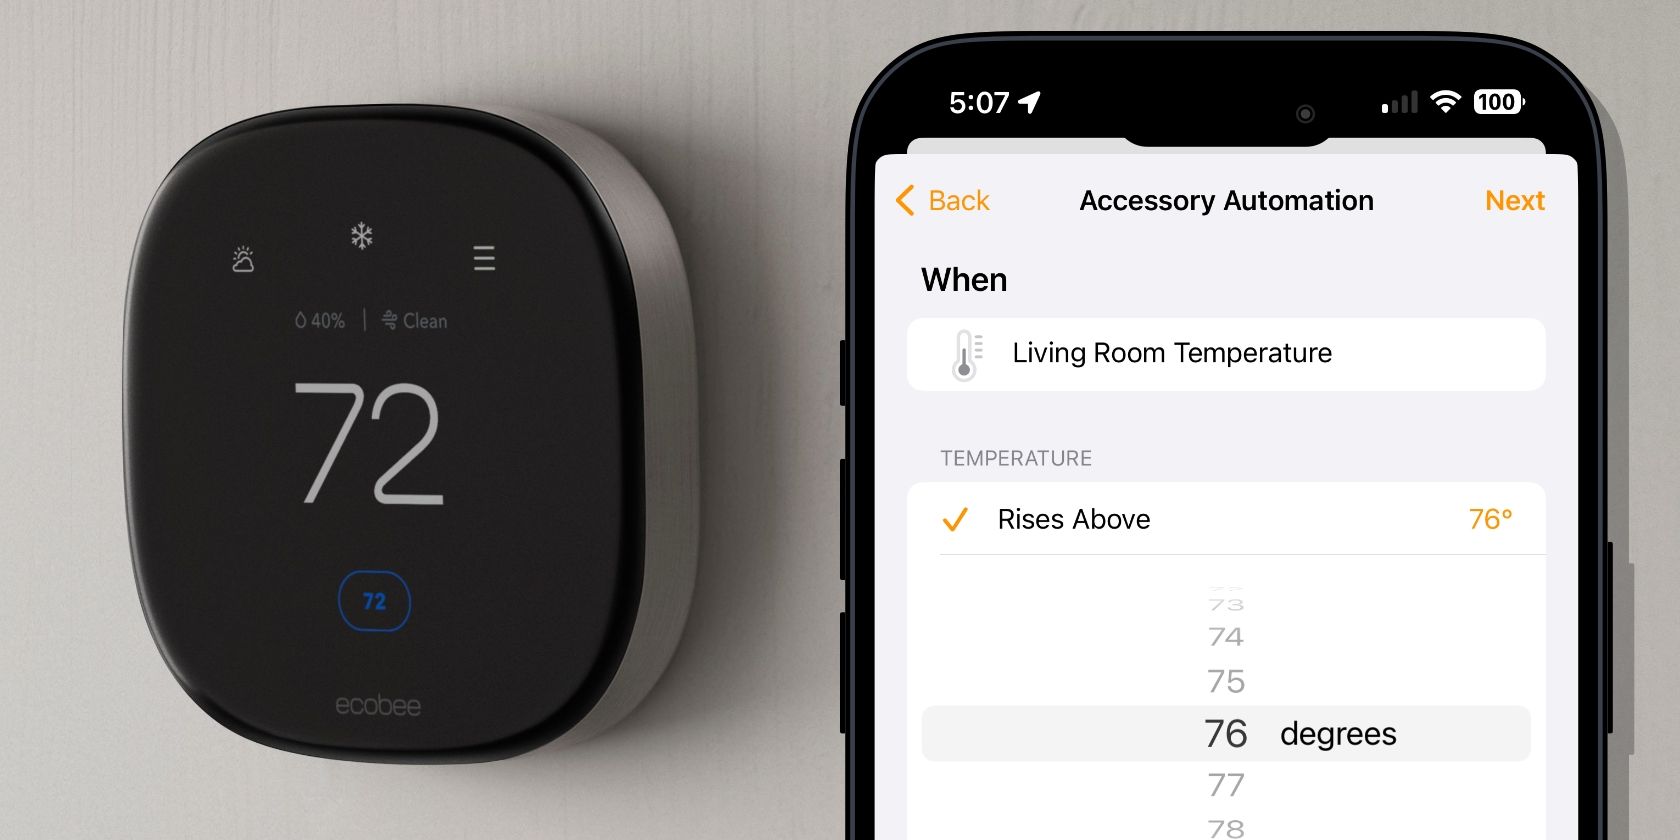 Temperature-Based Automations in HomeKit - Homekit News and Reviews